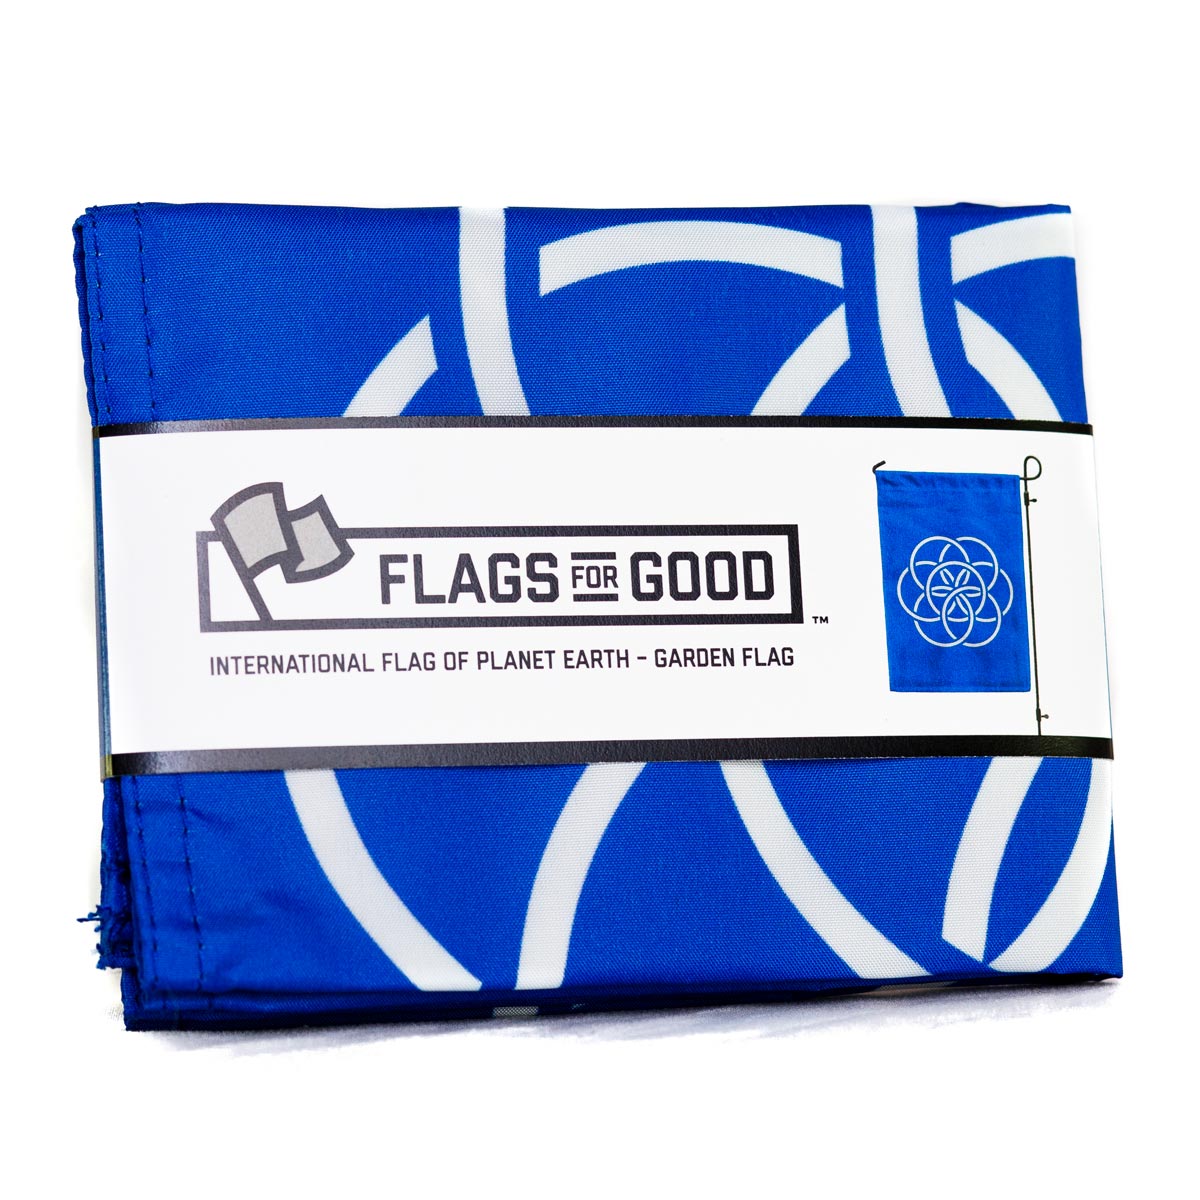 Colorado Flag Stick-On Patch | Donated